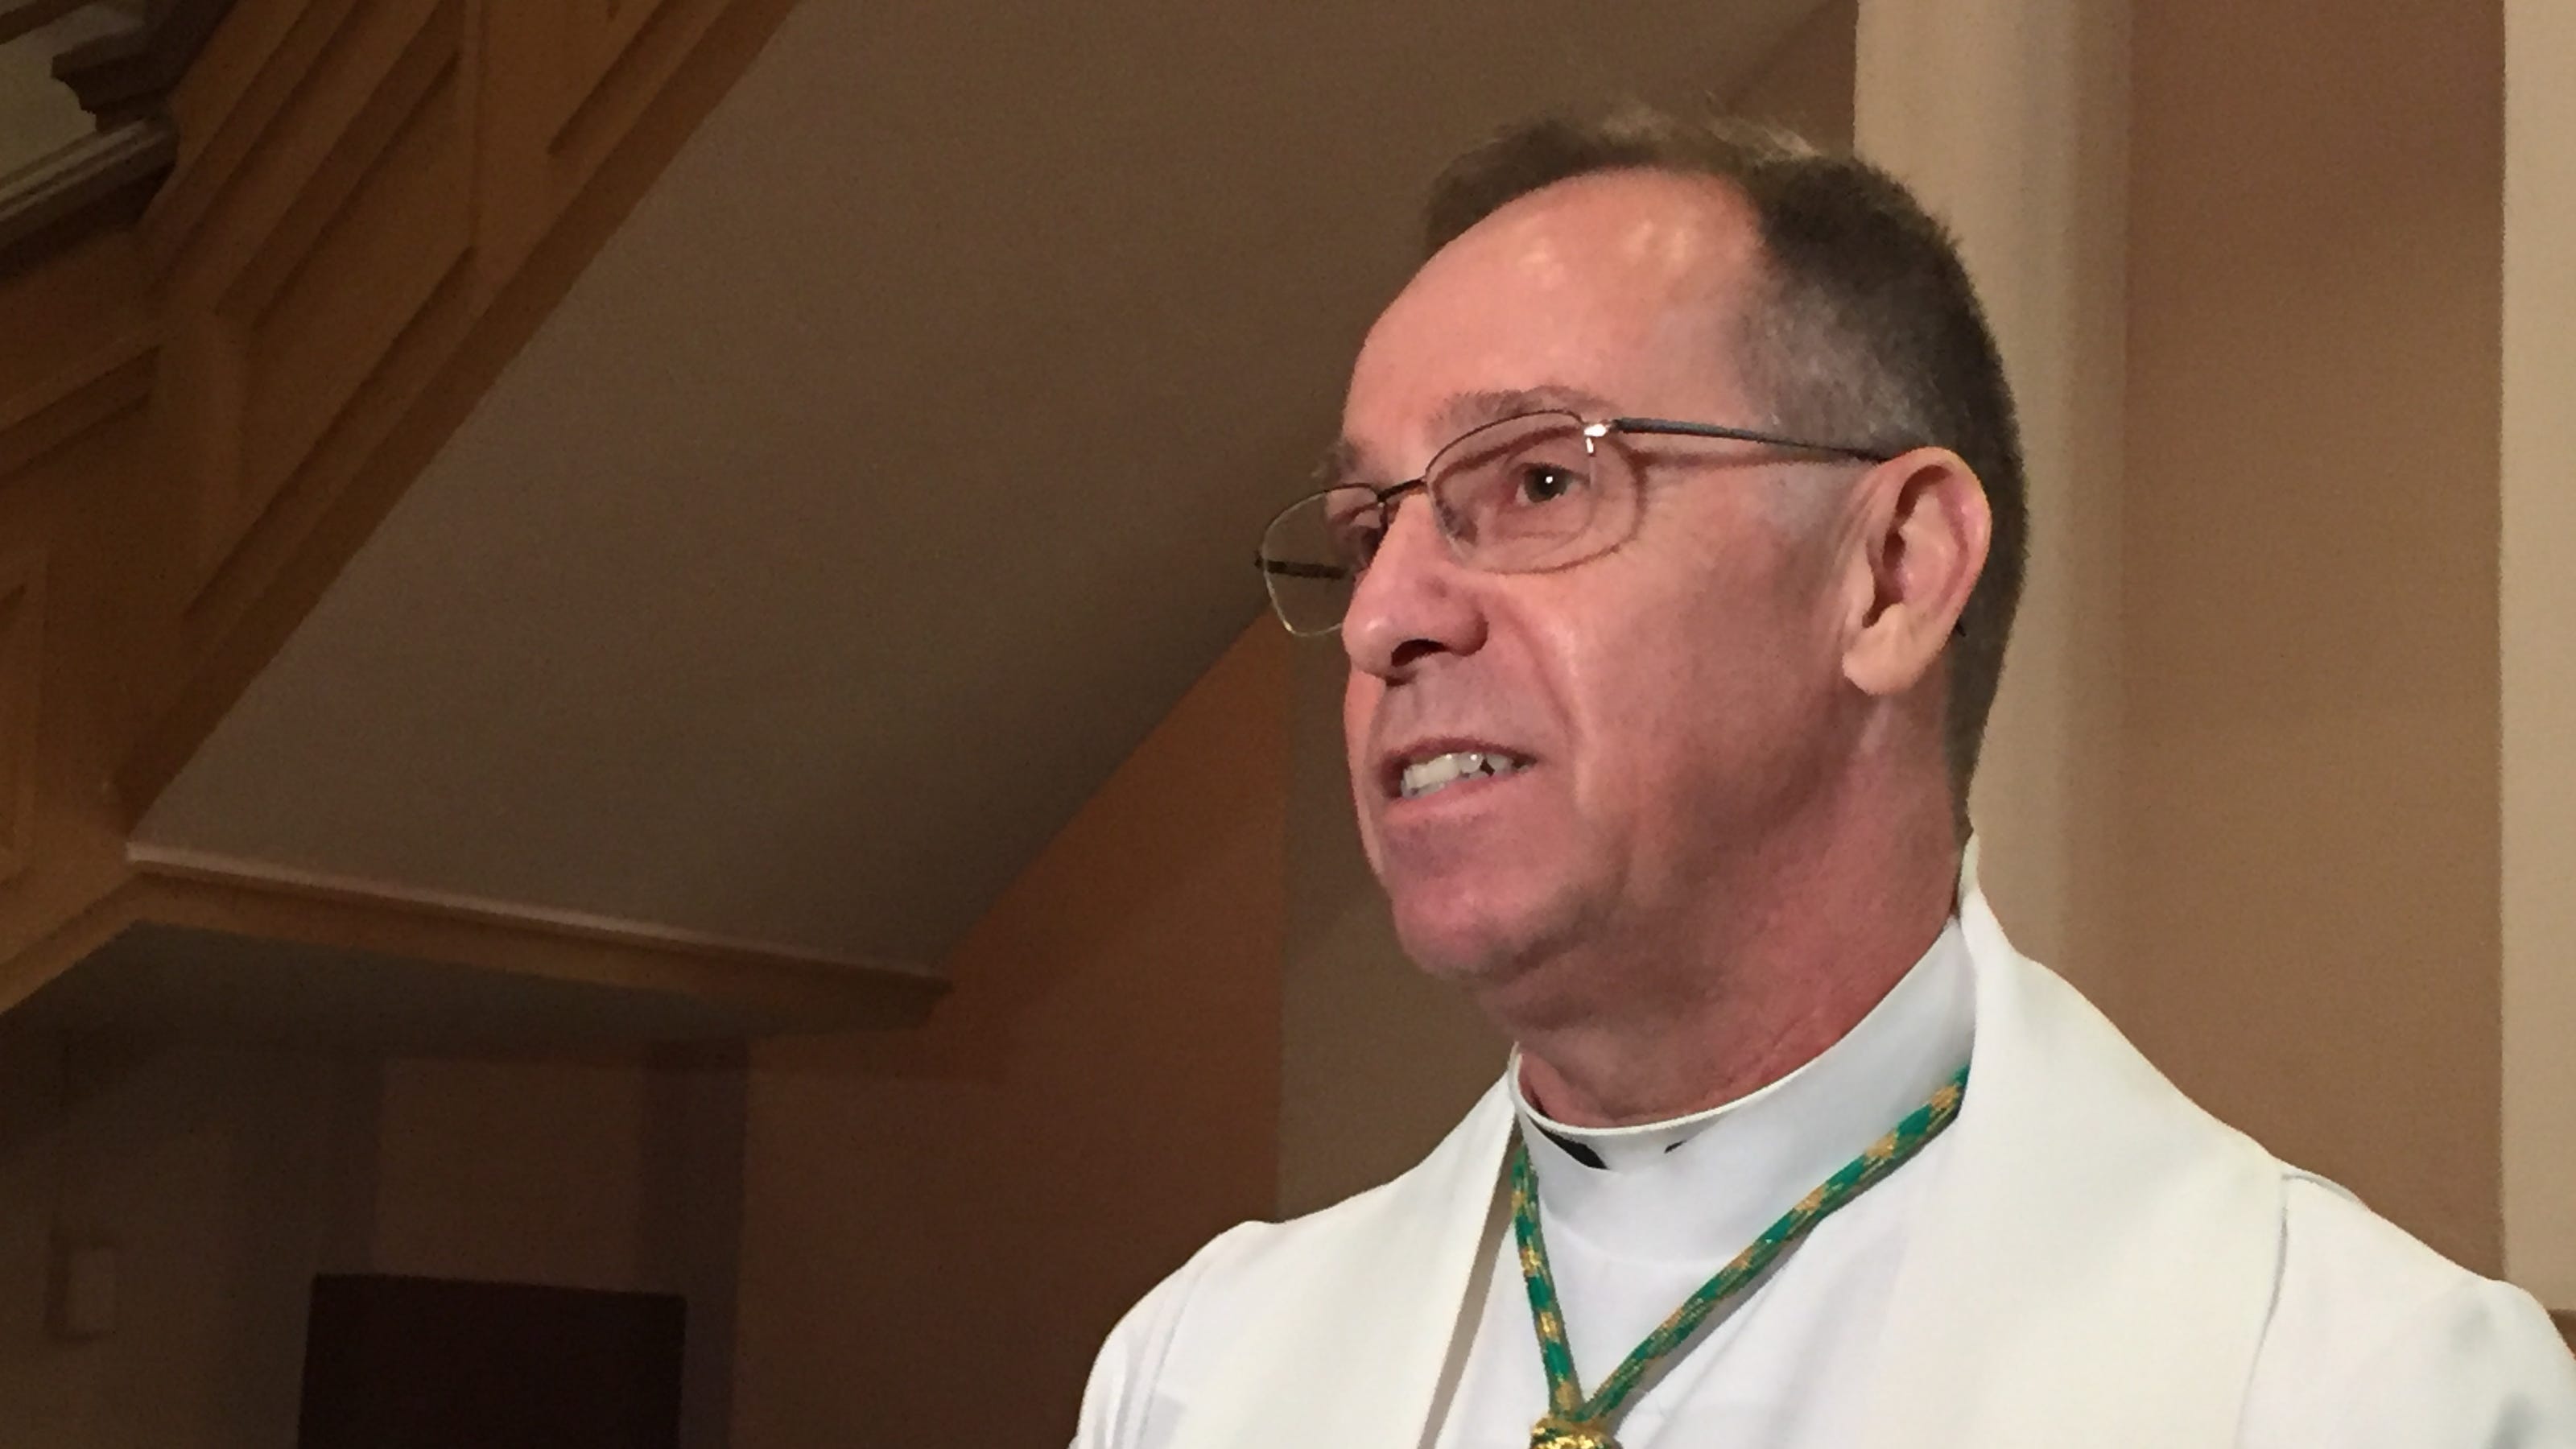 Indianapolis Catholic School Fires Gay Teacher To Stay In Archdiocese